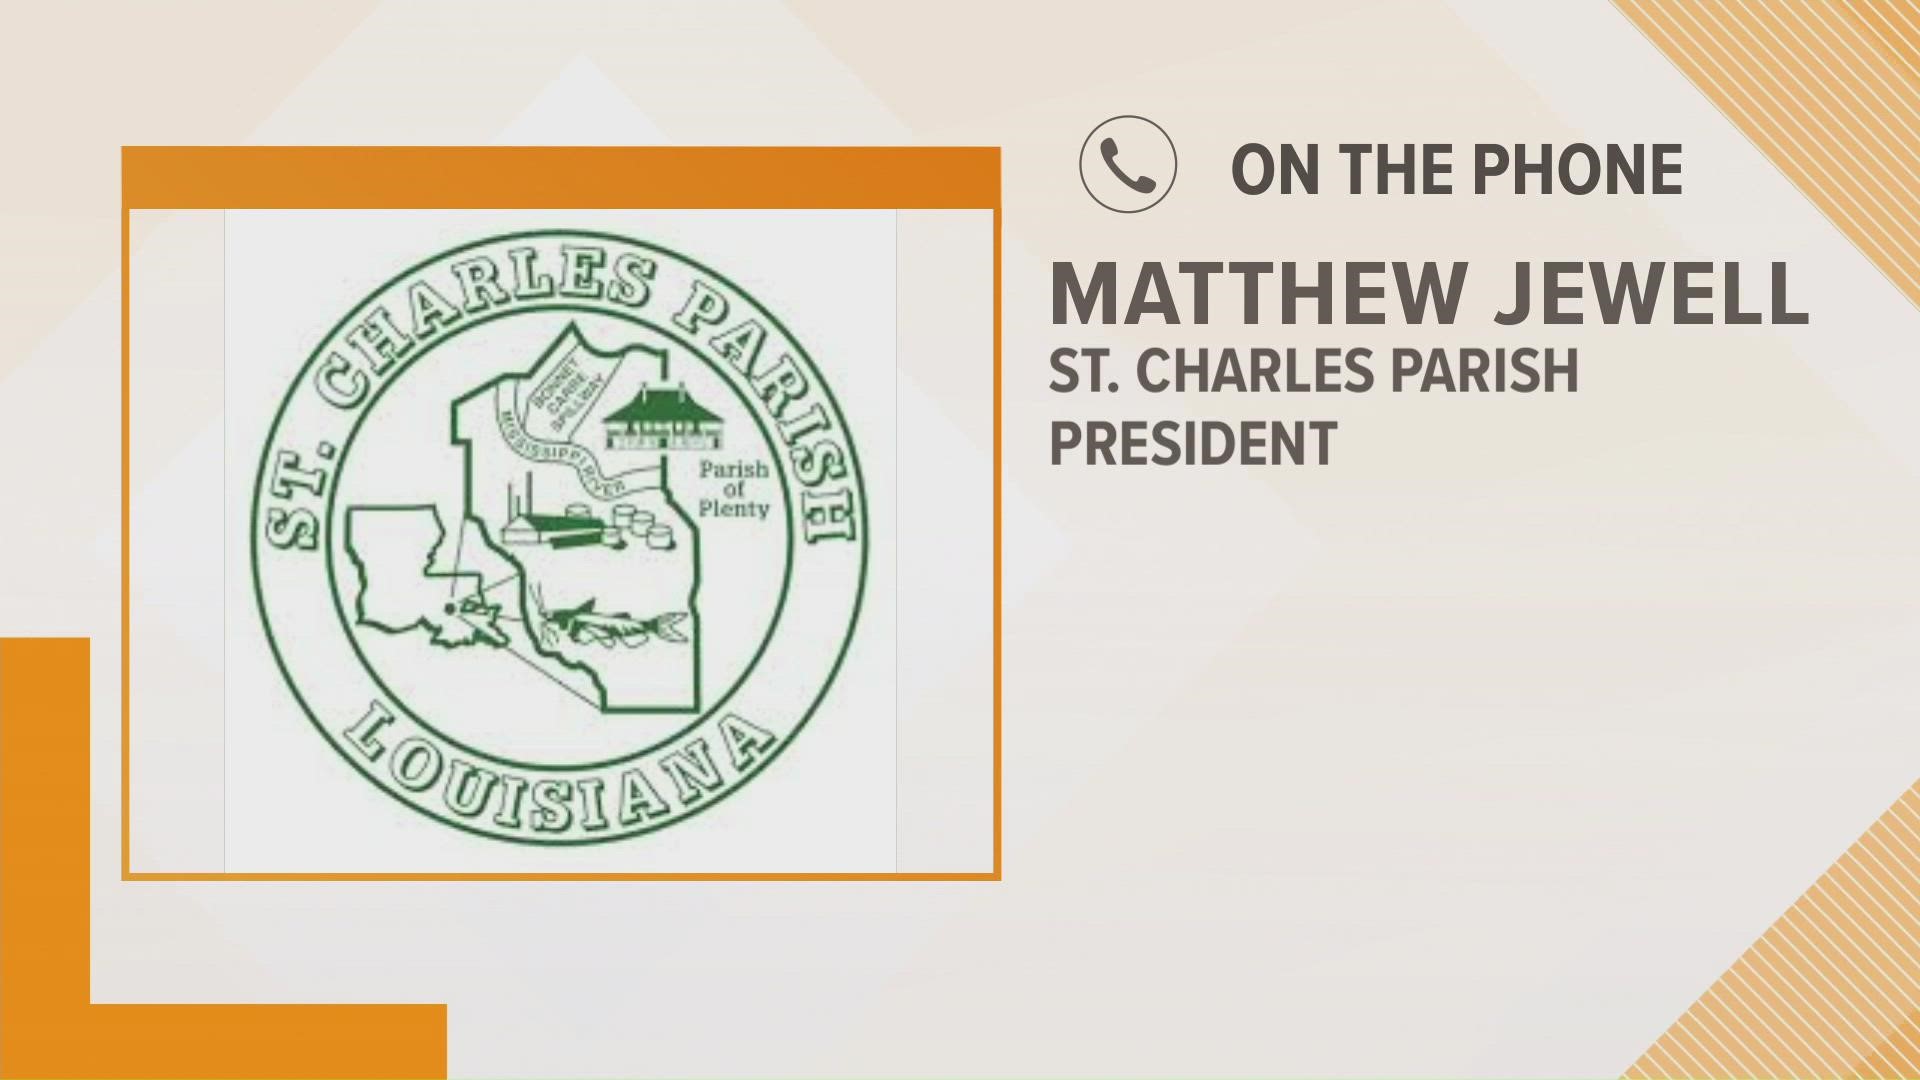 St. Charles Parish Parish Matthew Jewell talked to WWL-TV about the damage left behind by Hurricane Ida and the path going forward.